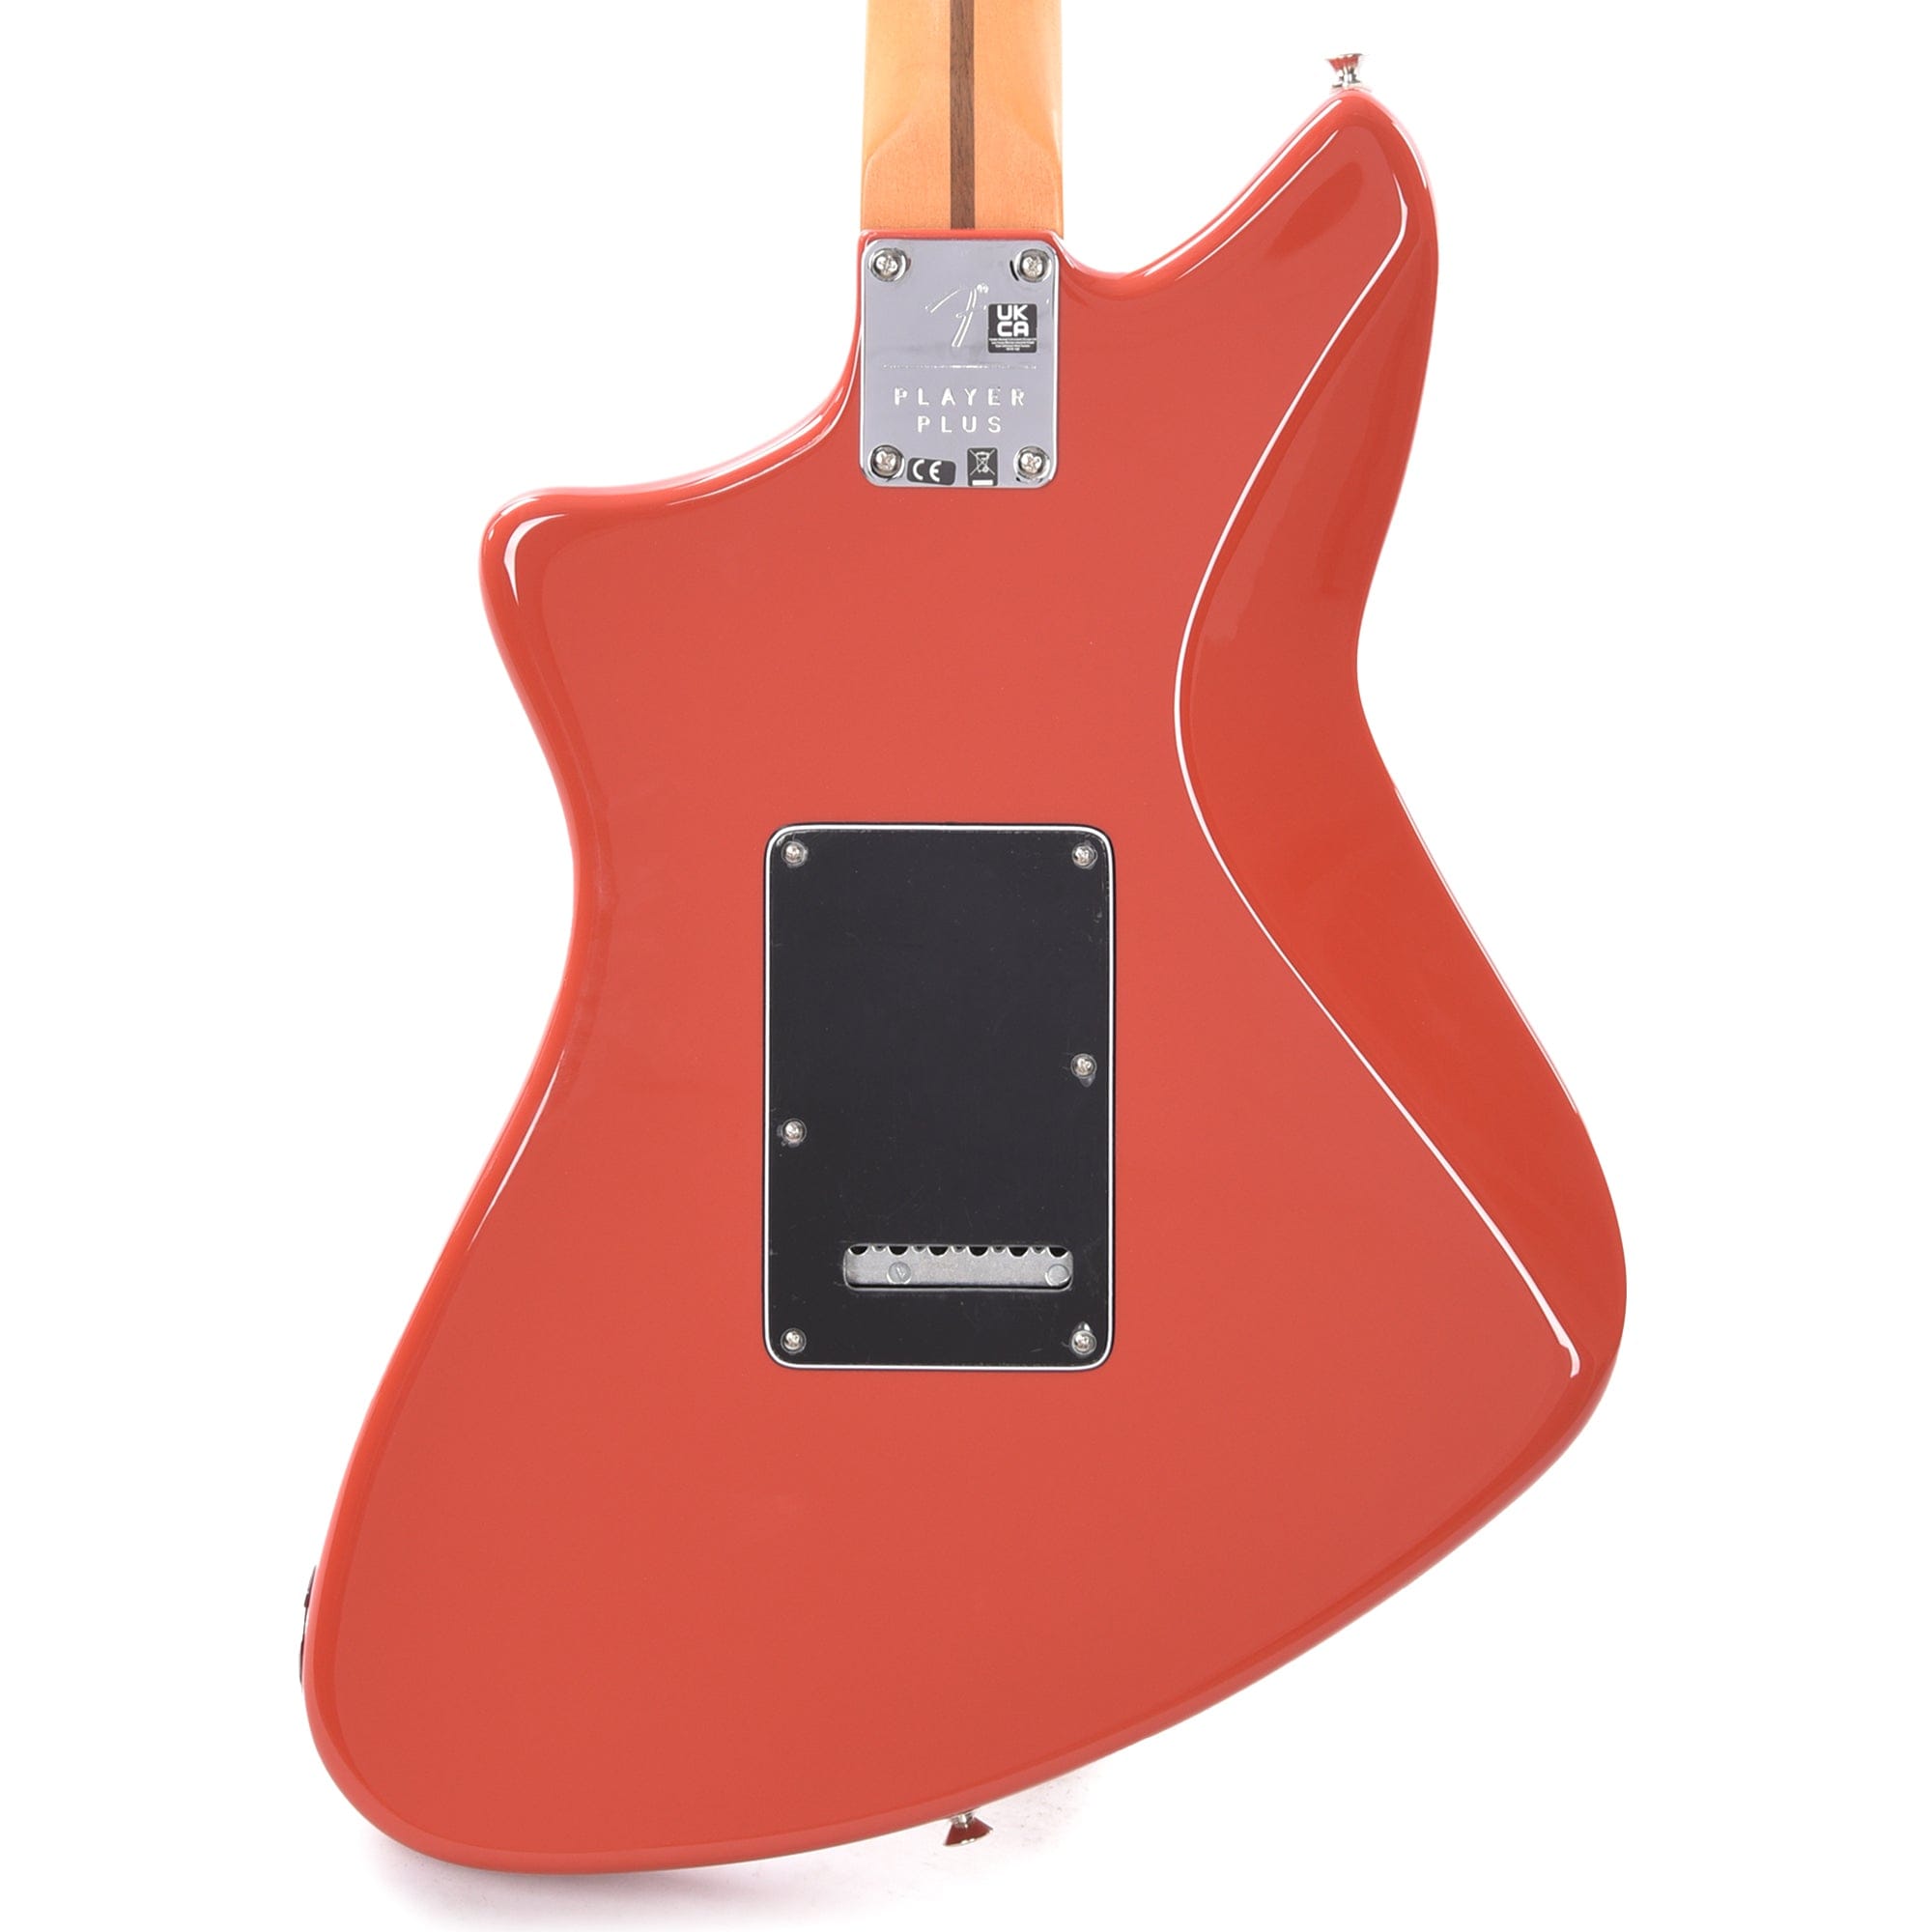 Fender Player Plus Meteora HH Fiesta Red Electric Guitars / Solid Body